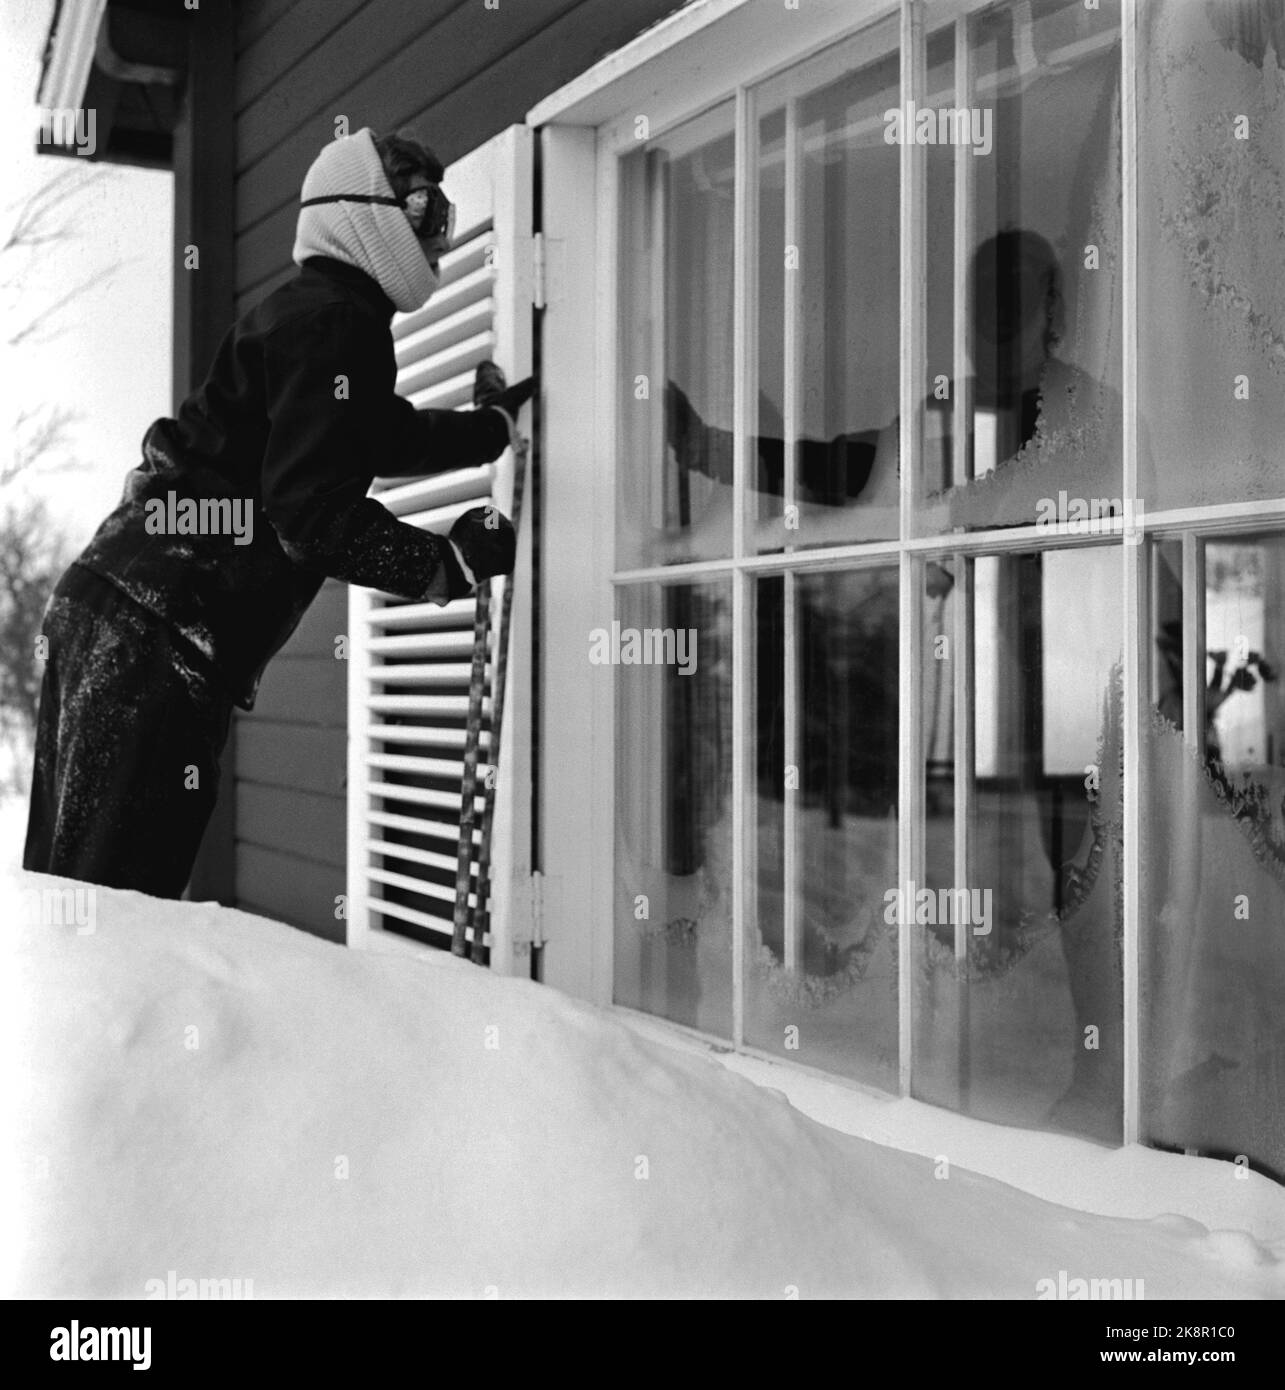 Gausdal 1955 - Queen Ingrid of Denmark on a private winter holiday in Norway with her three daughters, inheritance princess Margrethe, Princess Benedikte and Princess Anne -Marie. Queen Ingrid has not had skis on his legs in 20 years. In the picture, the heir to the throne Margrethe looks through the window of a cabin. Photo: Sverre A. Børretzen / Current / NTB Stock Photo